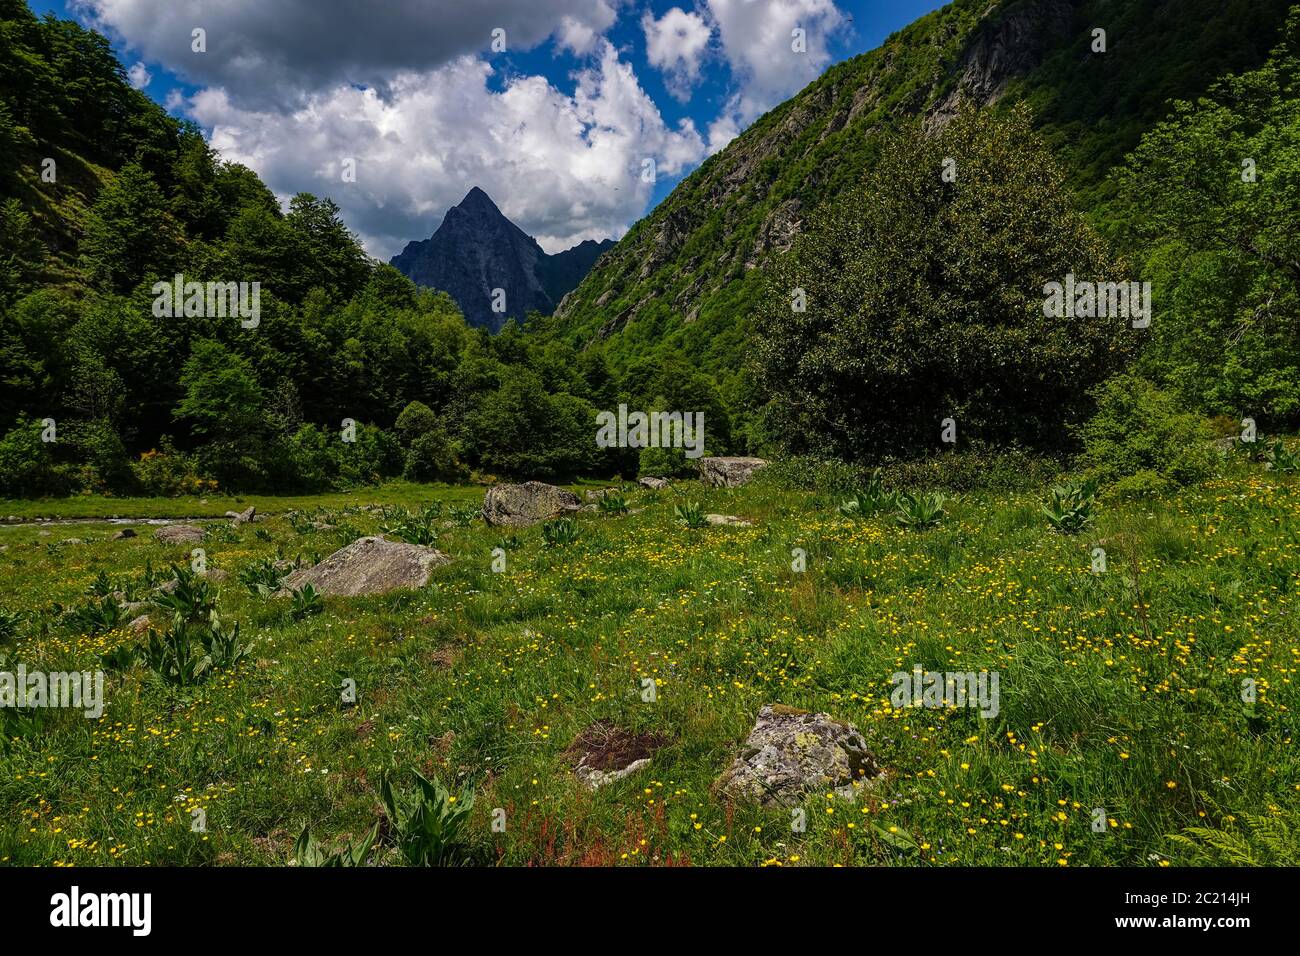 The prominent rocky peak of the Dent d'Orlu, Ax les Thermes, Ariege, French Pyrenees, France Stock Photo